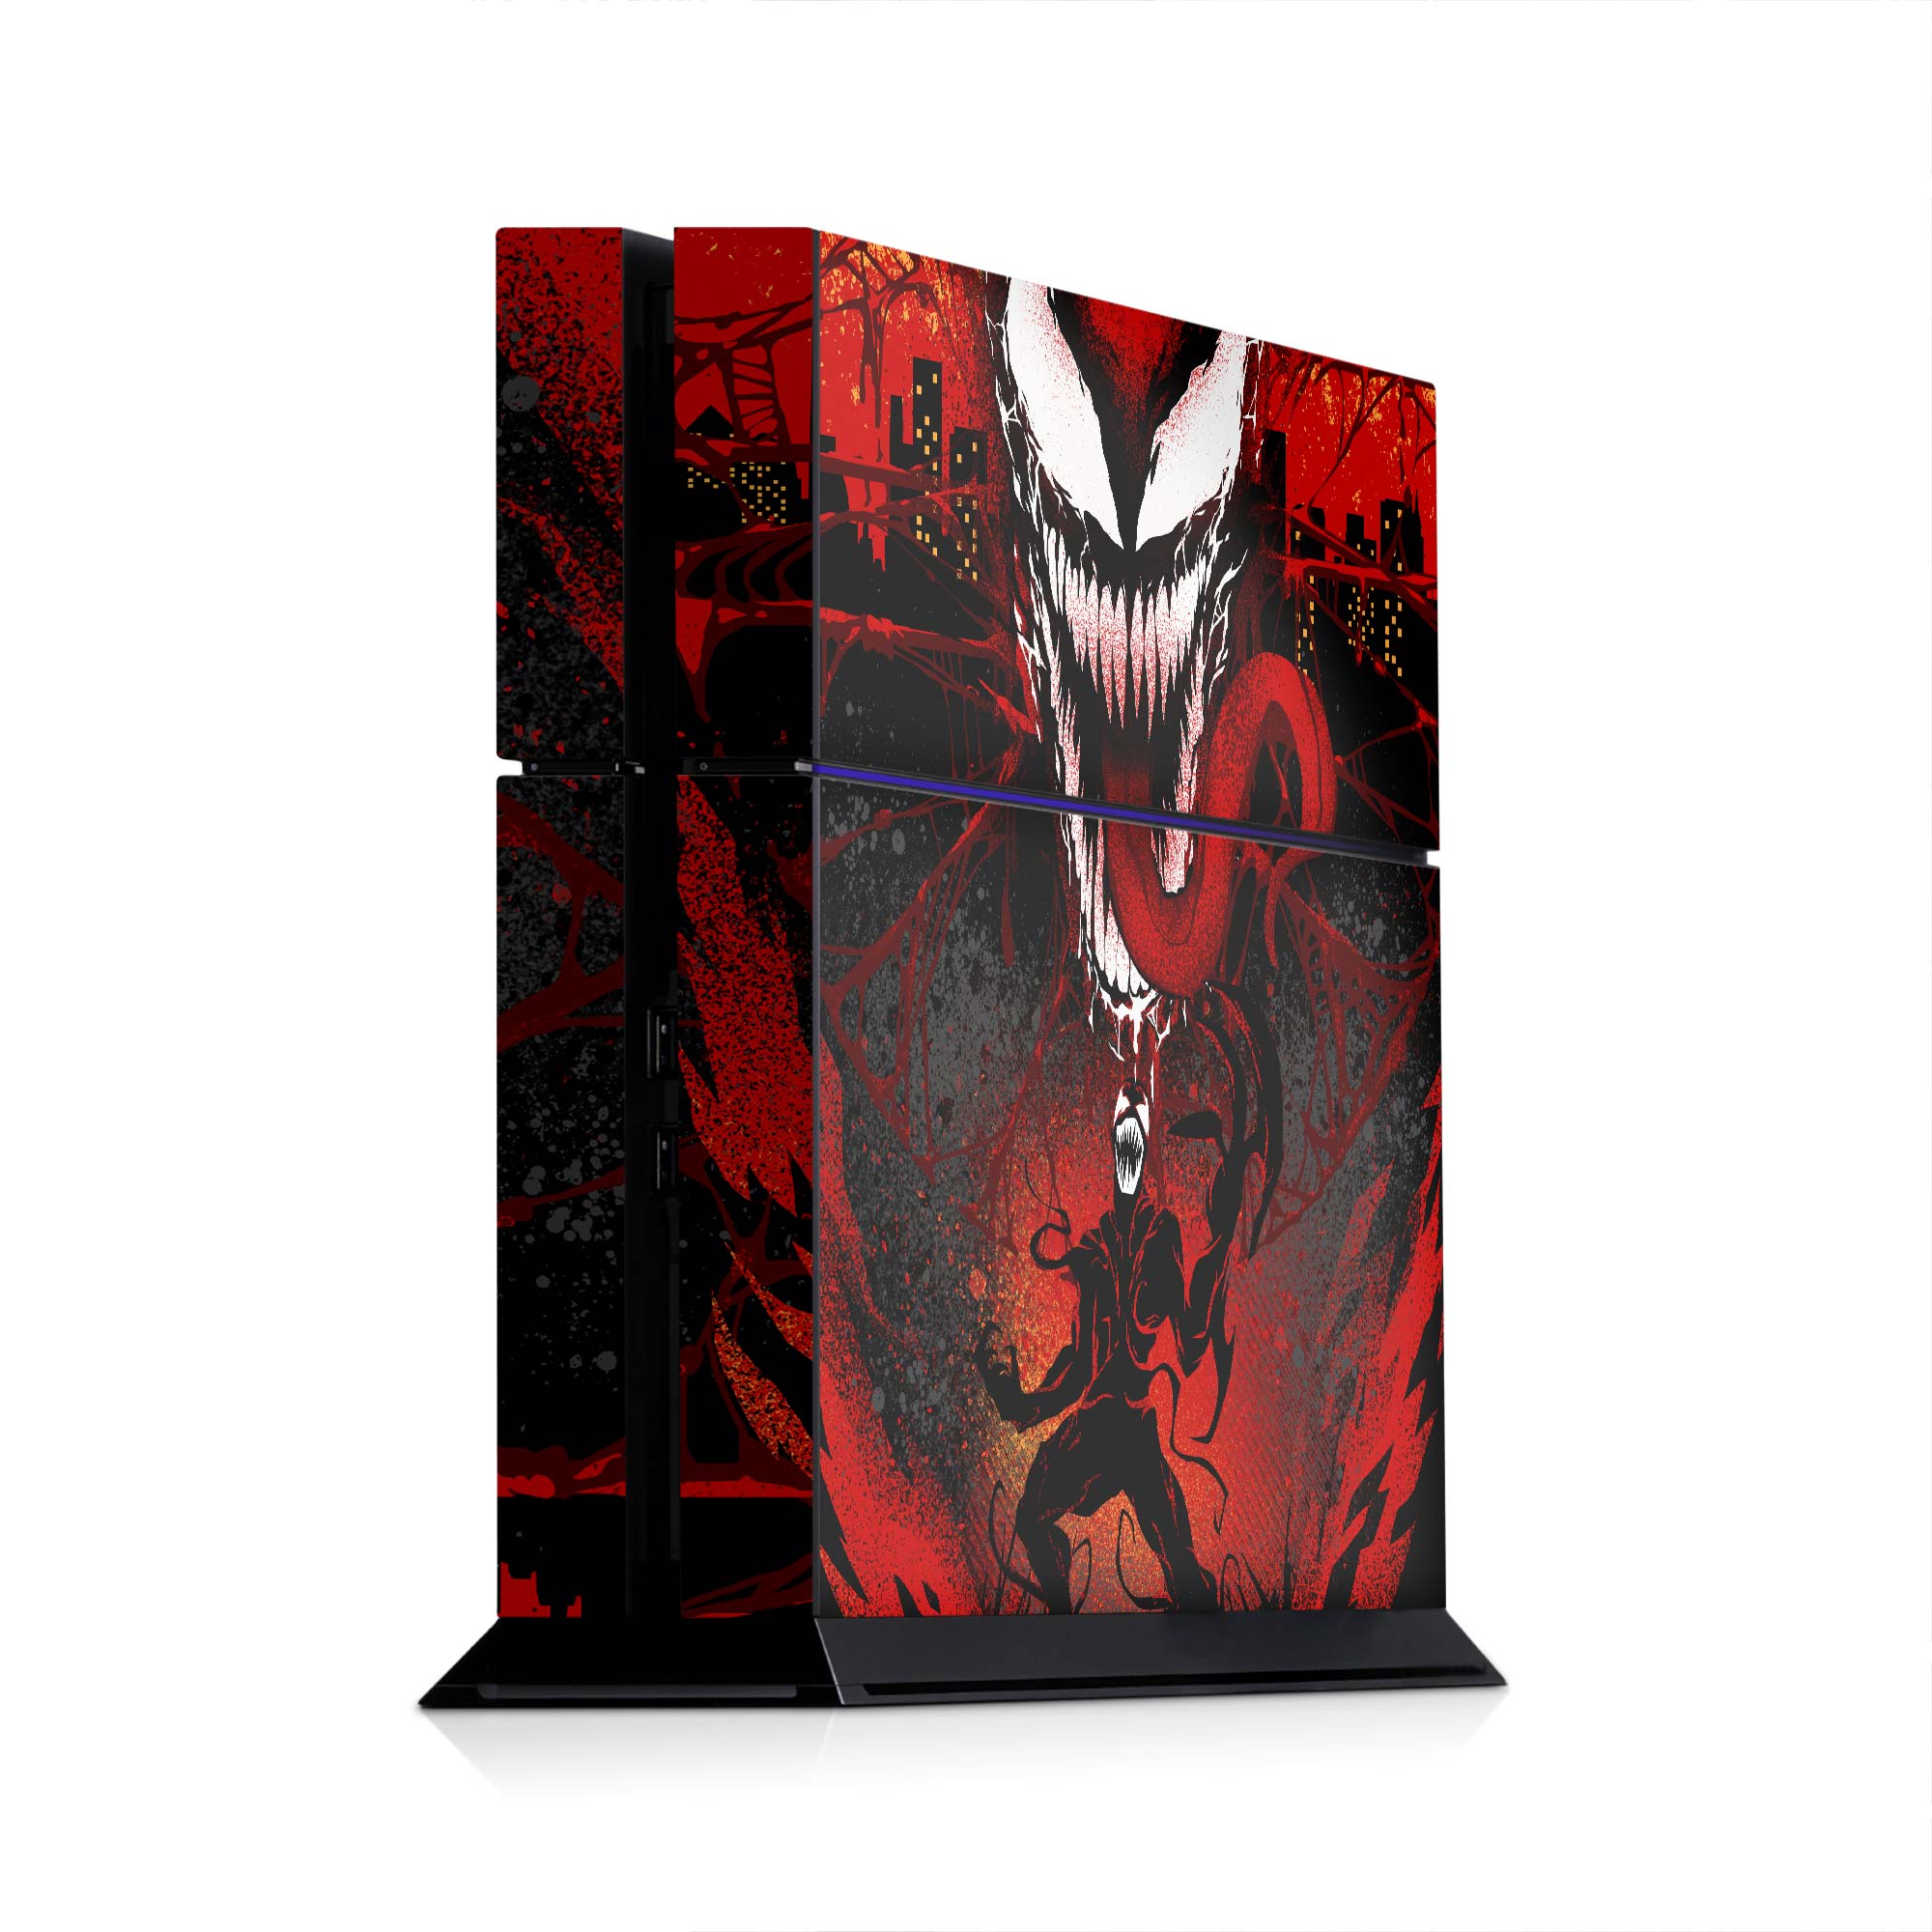 Symbiote *LIMITED* - PS4 Console Skin